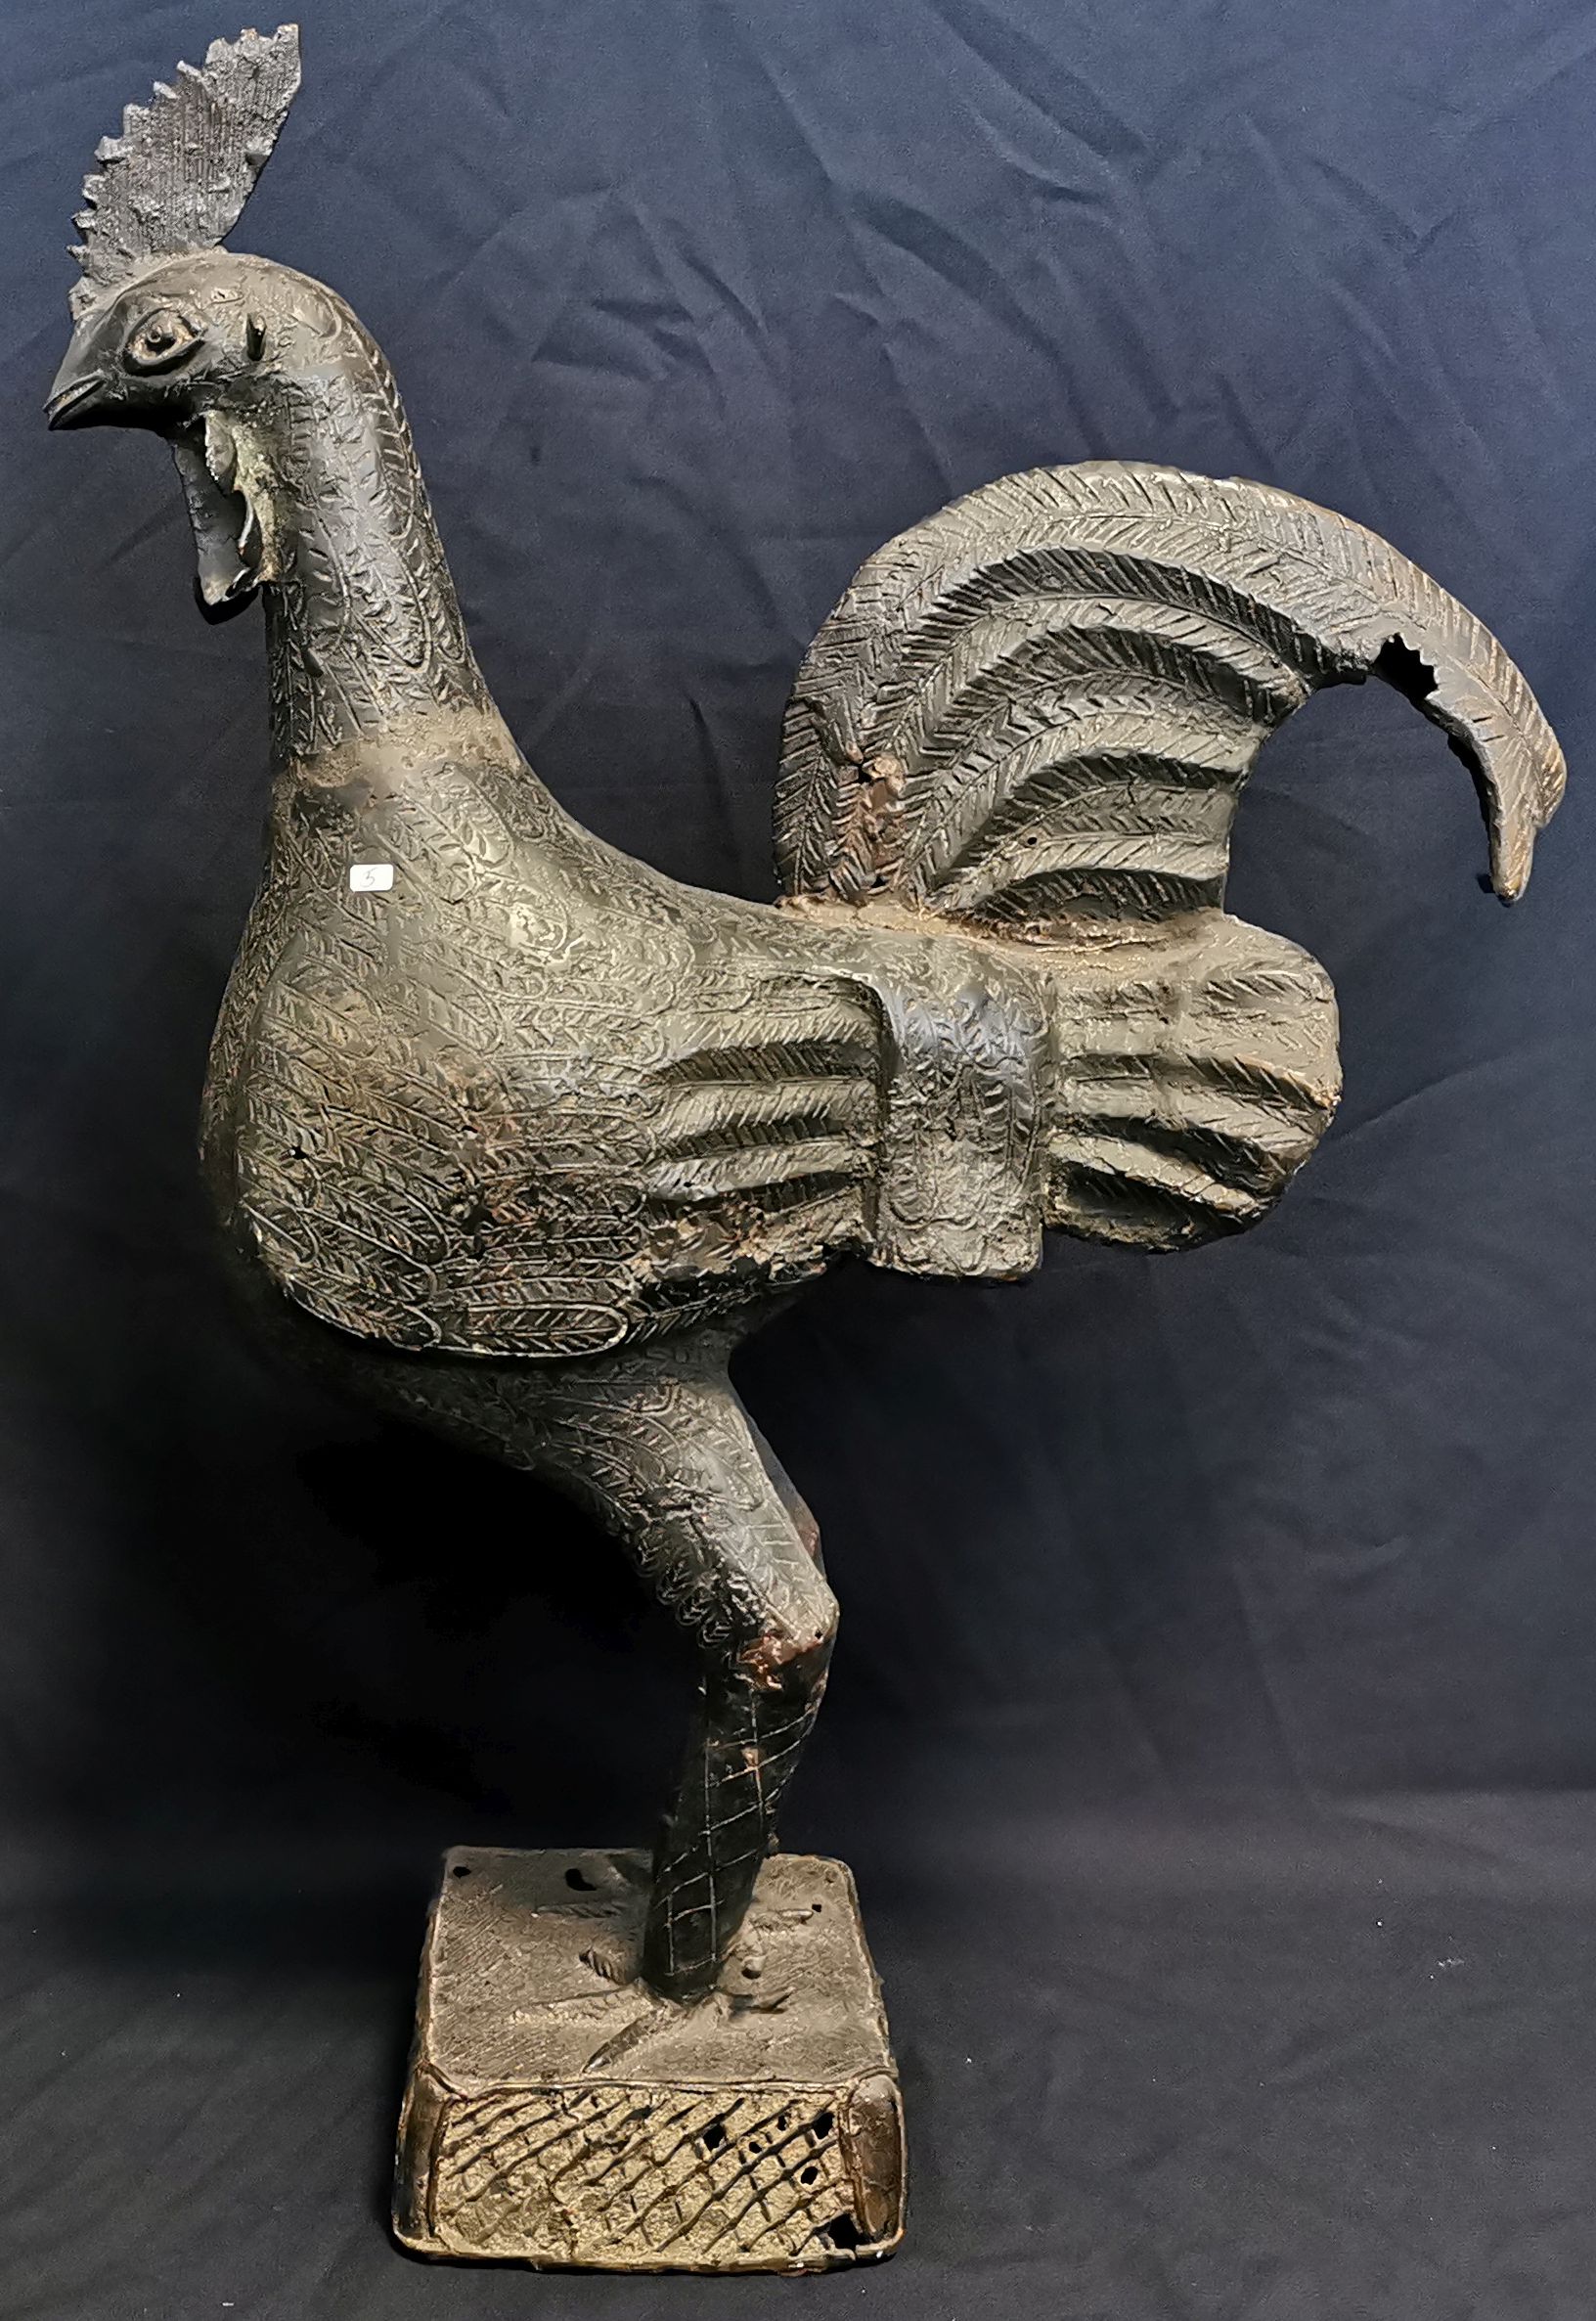 ANIMAL SCULPTURE "ROOSTER"